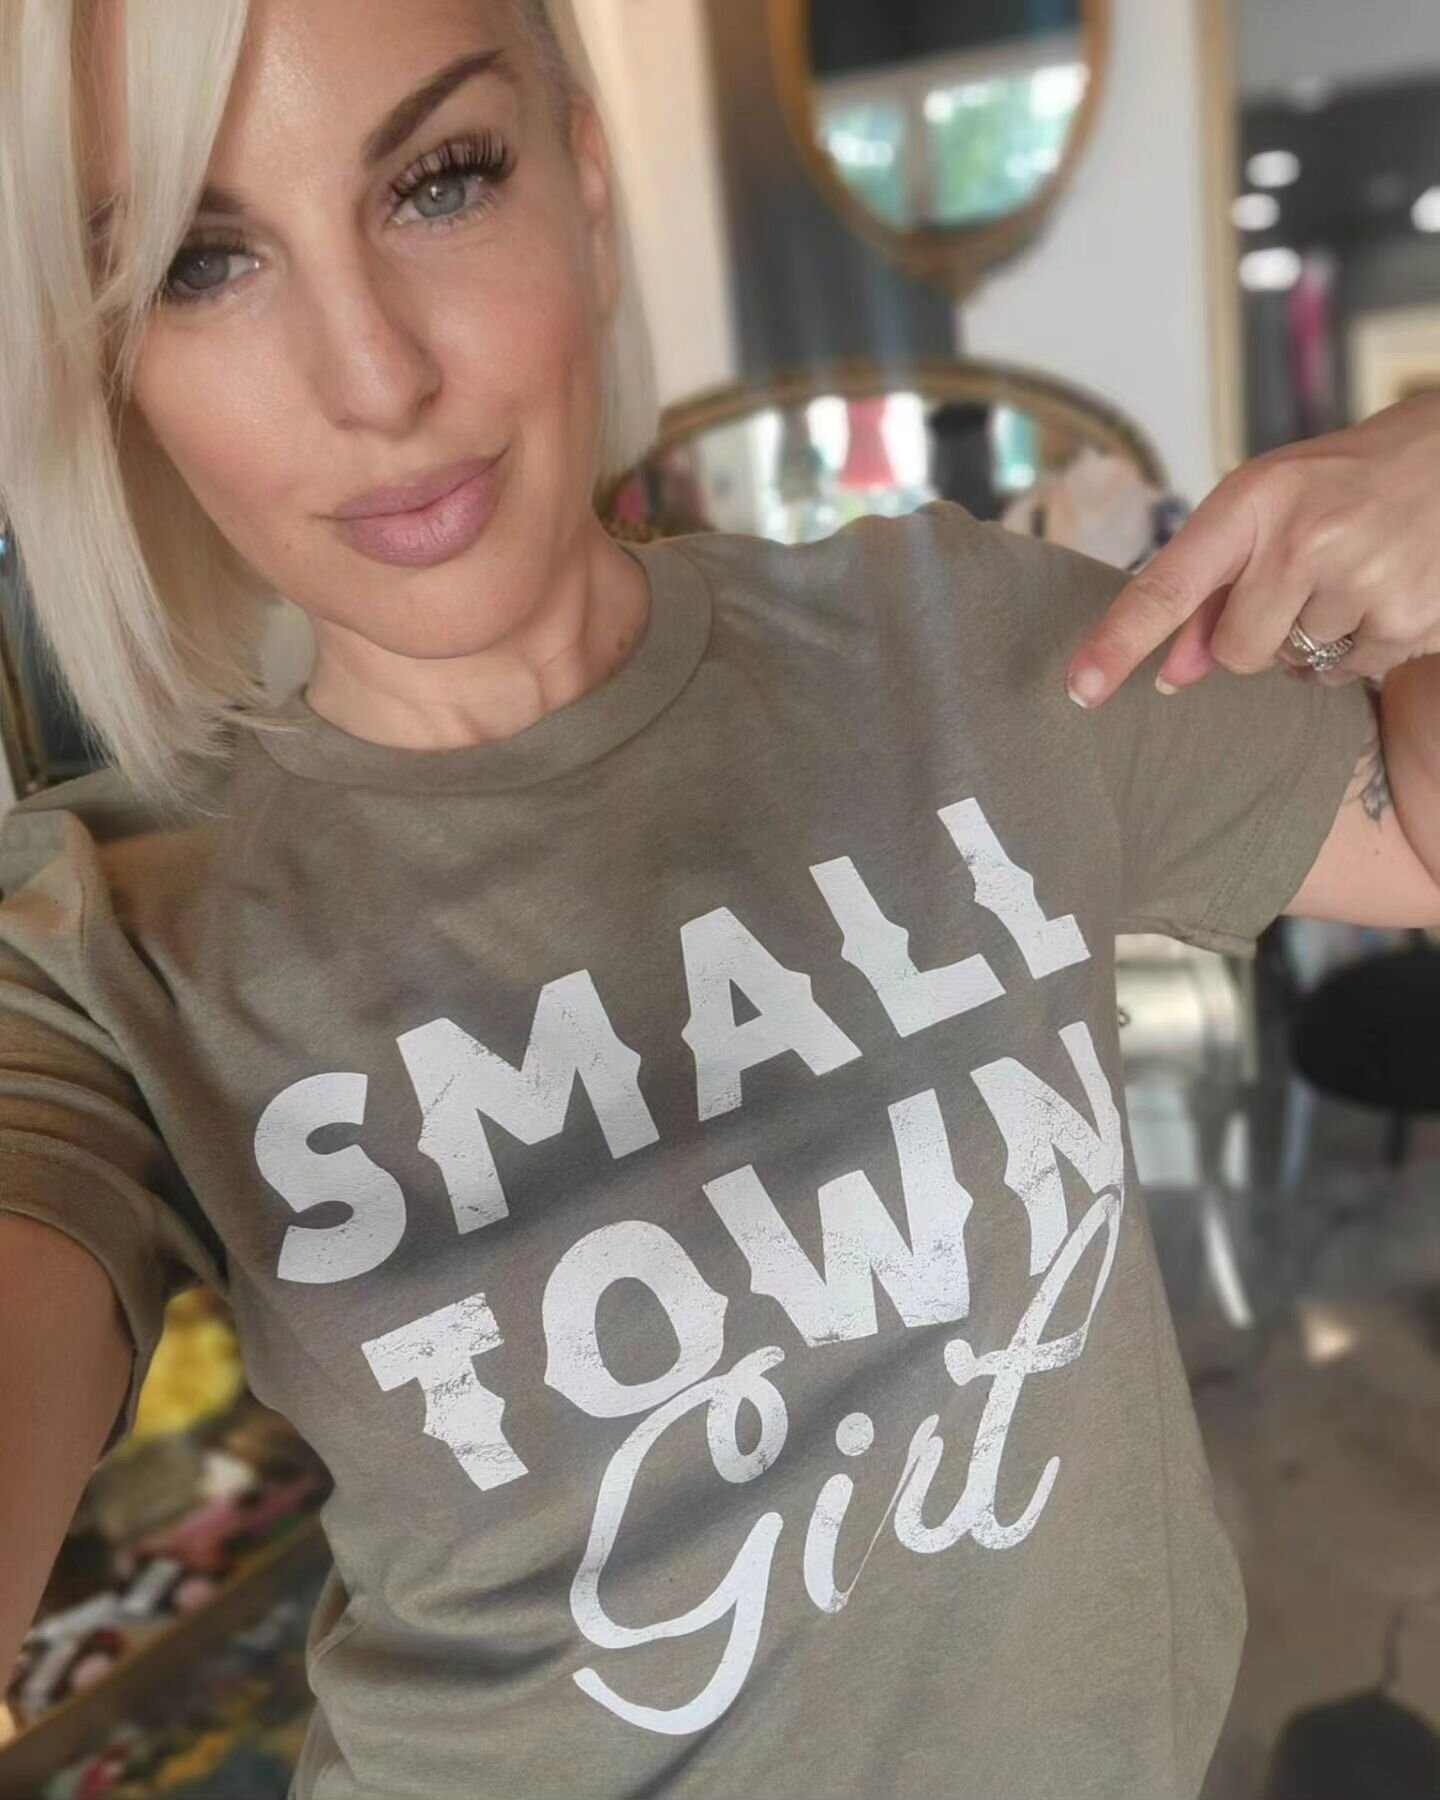 Love exploring boutiques in small towns. ❤️ Found this t-shirt in @bellaglamtexas in Keller, Texas.